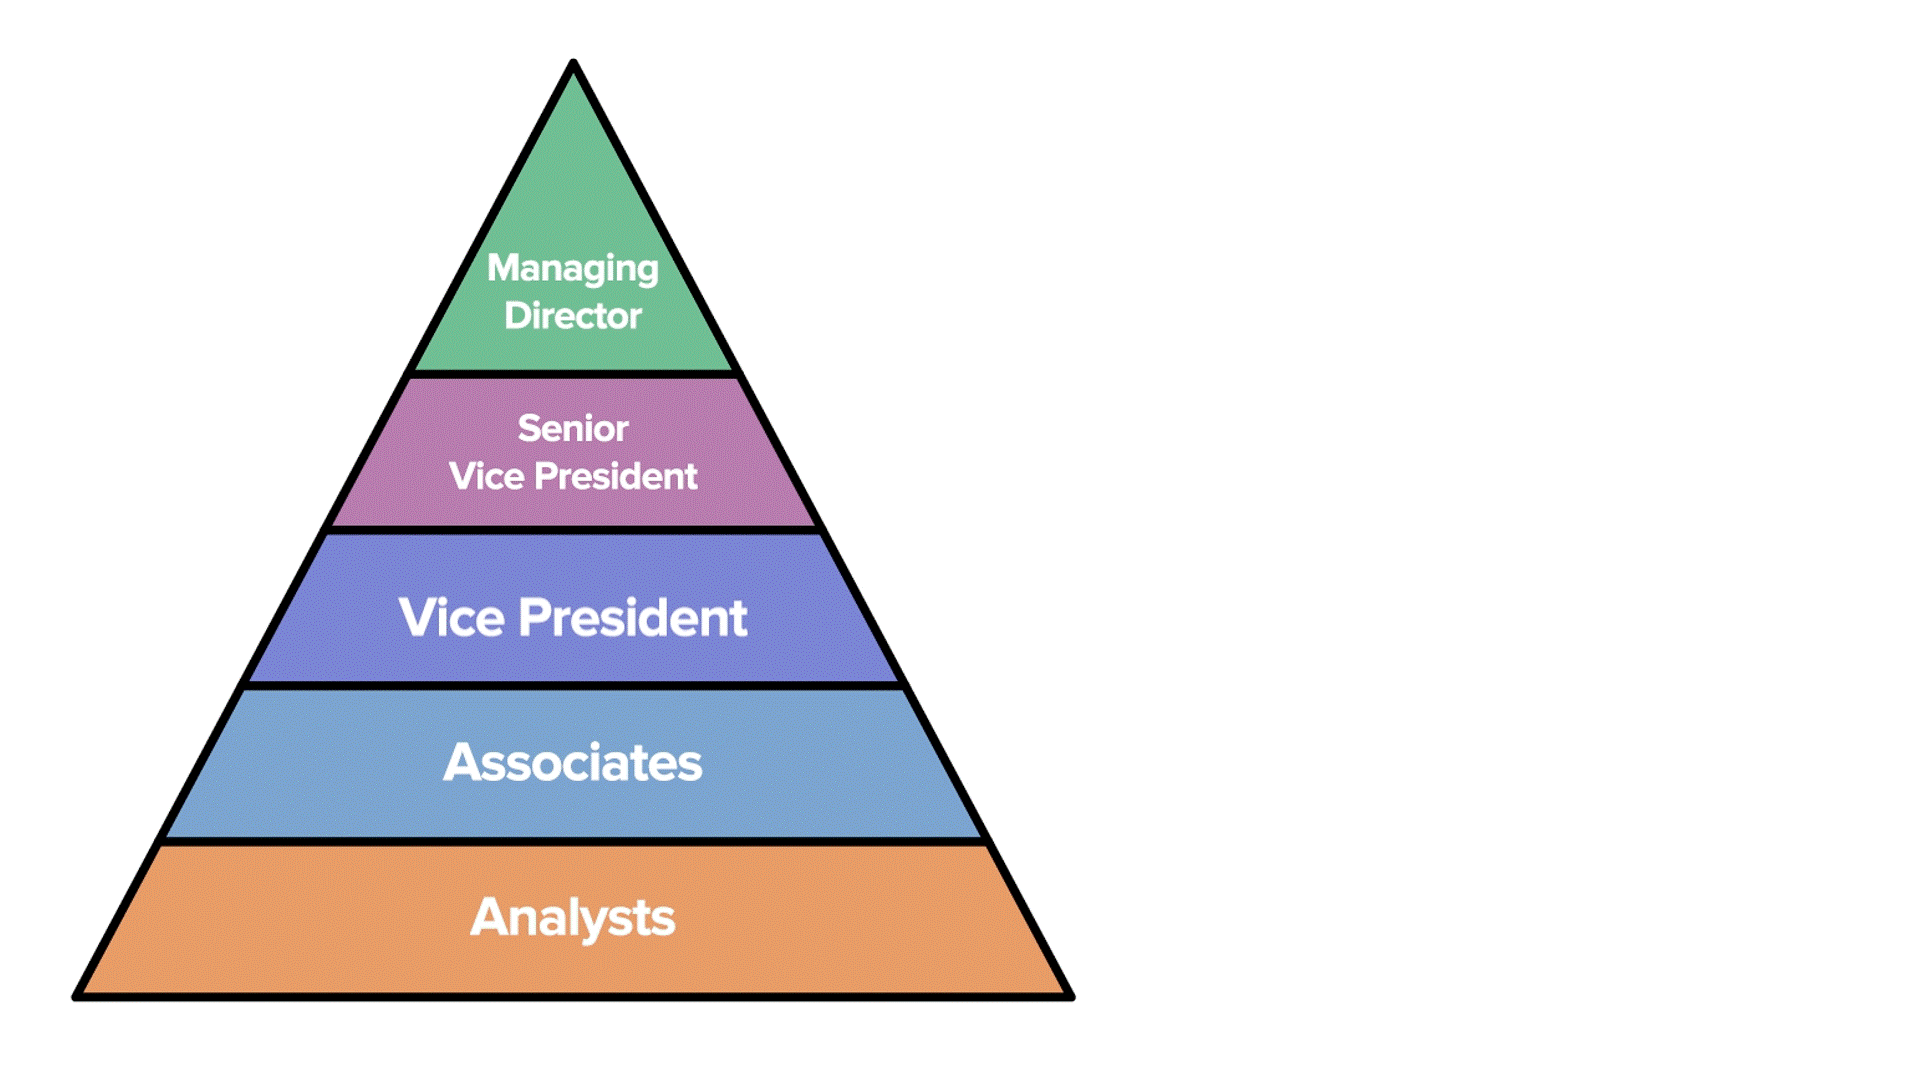 A pyramid showing the pre-MBA and post-MBA roles in Investment Banking